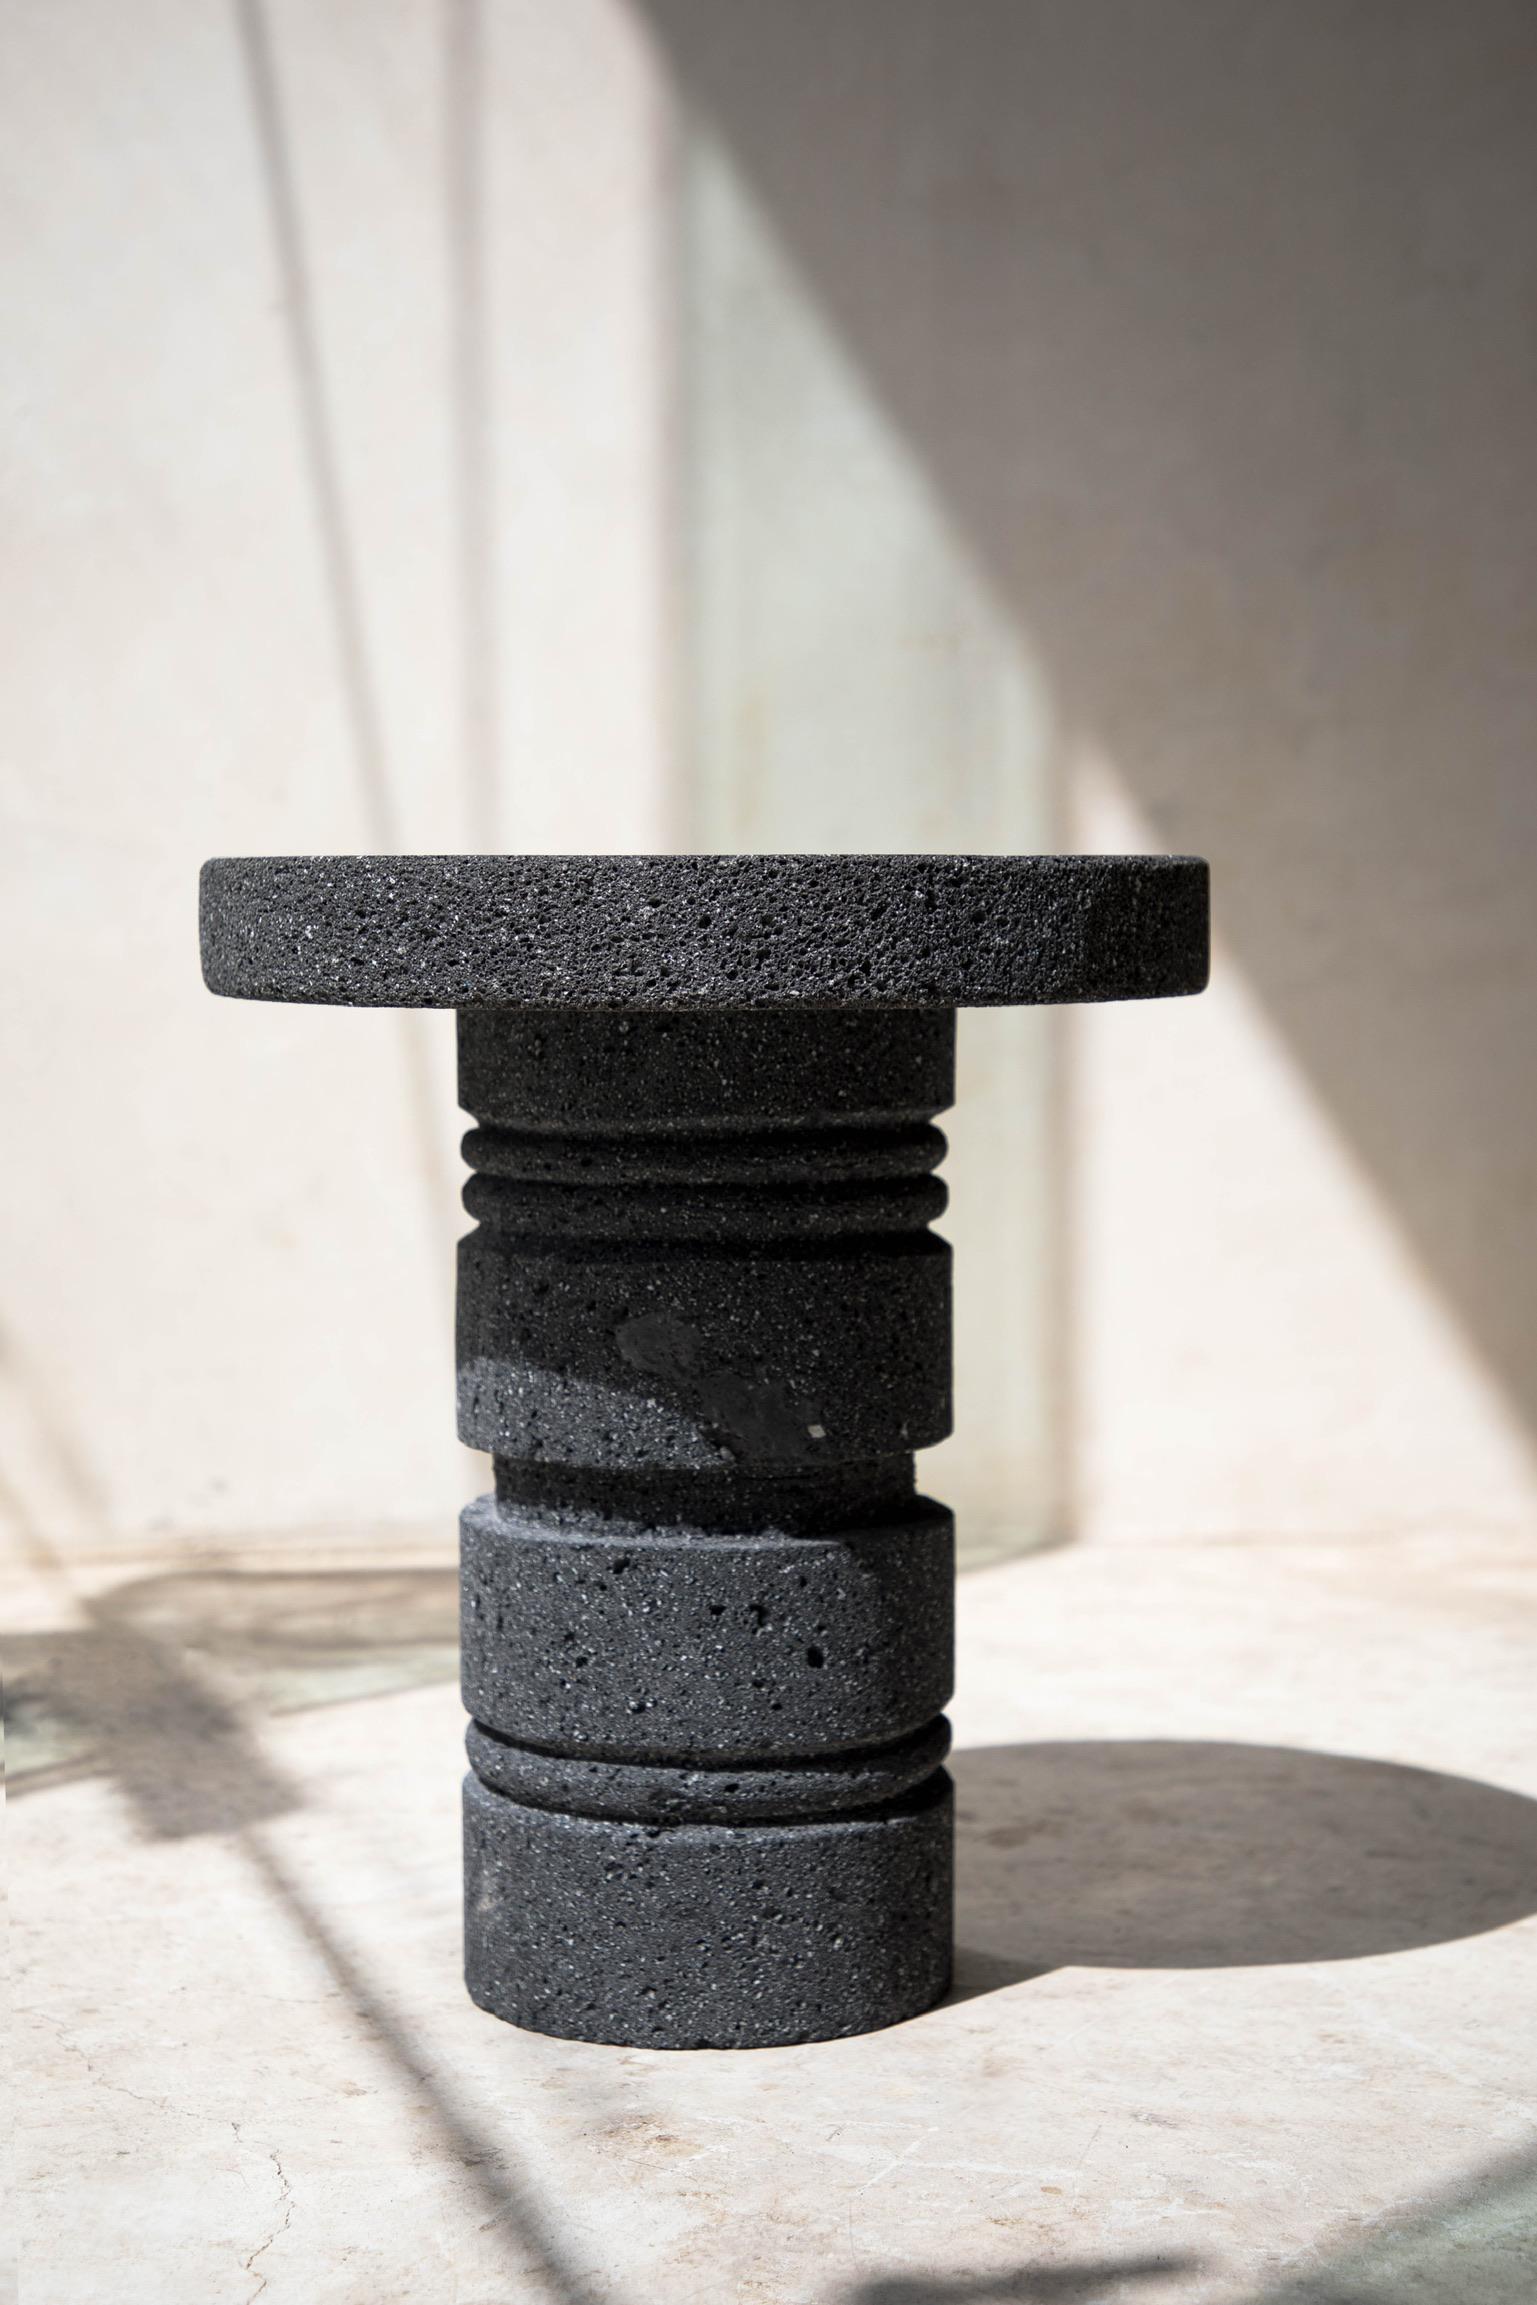 The original stone totem by Daniel Orozco
Material: Volcanic rock.
Dimensions: D 35 x H 45 cm

Volcanic stone Totem.

Daniel Orozco Estudio
We are an inclusive interior design estudio, who love to work with fabrics and natural textiles in